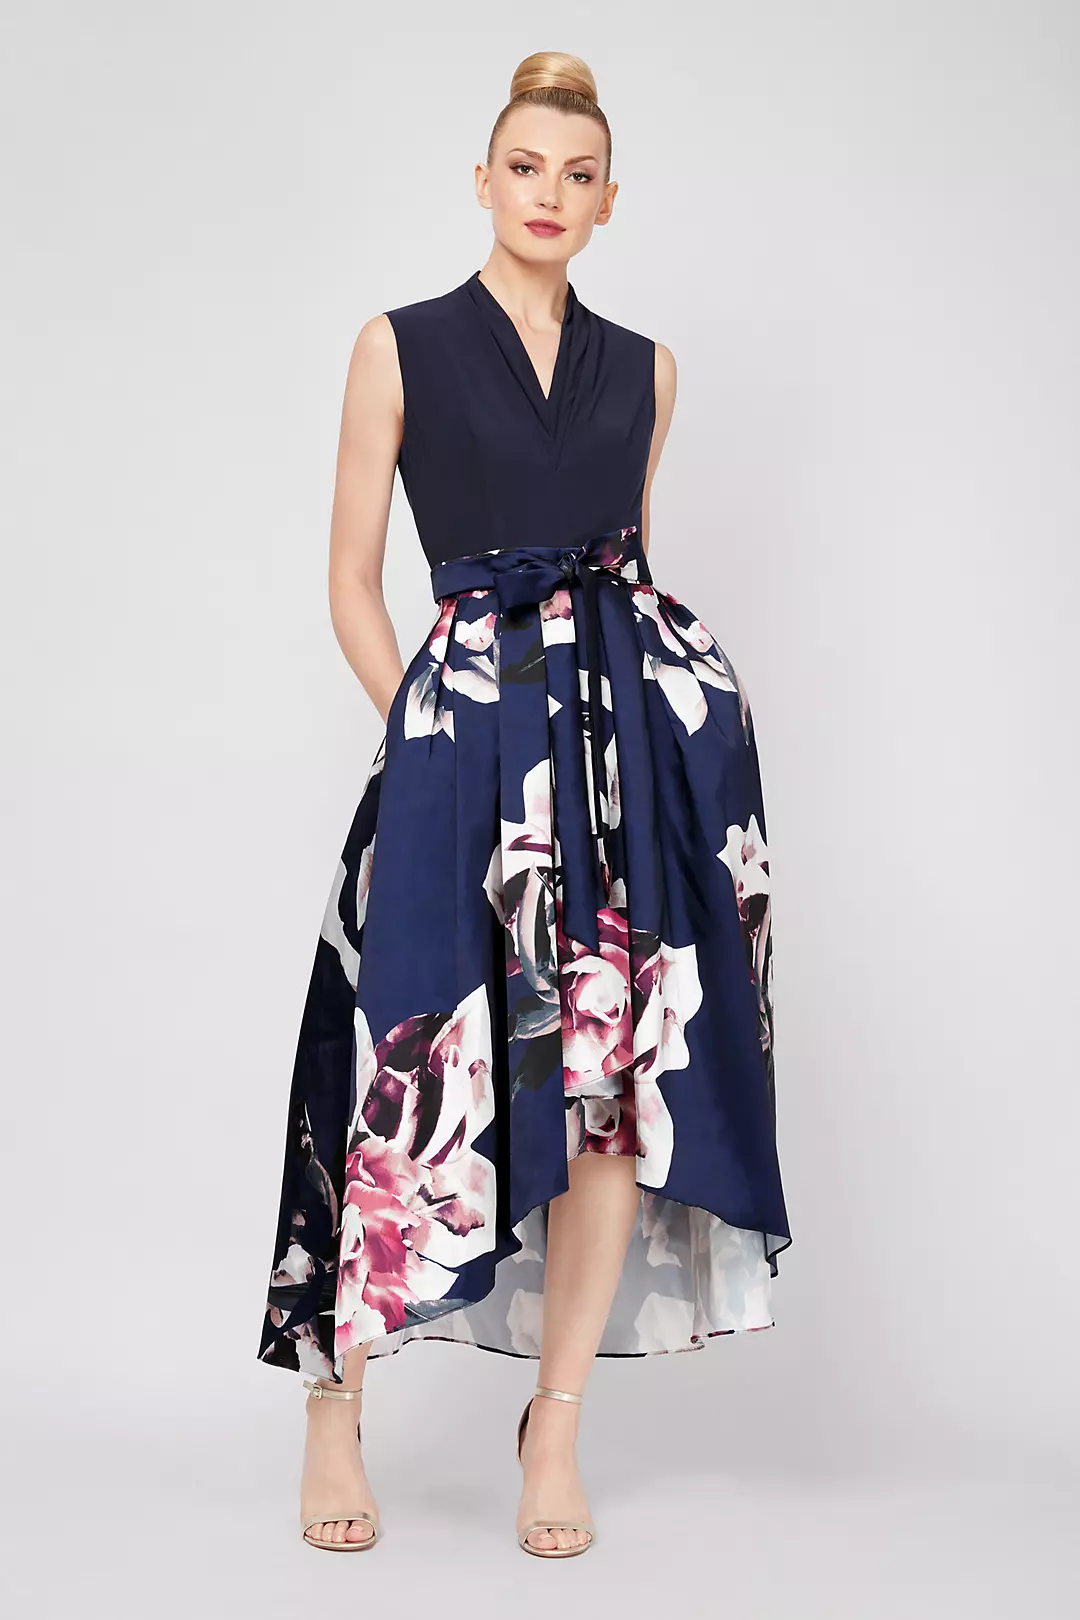 V-Neck Floral Printed Mikado High-Low Ball Gown Image